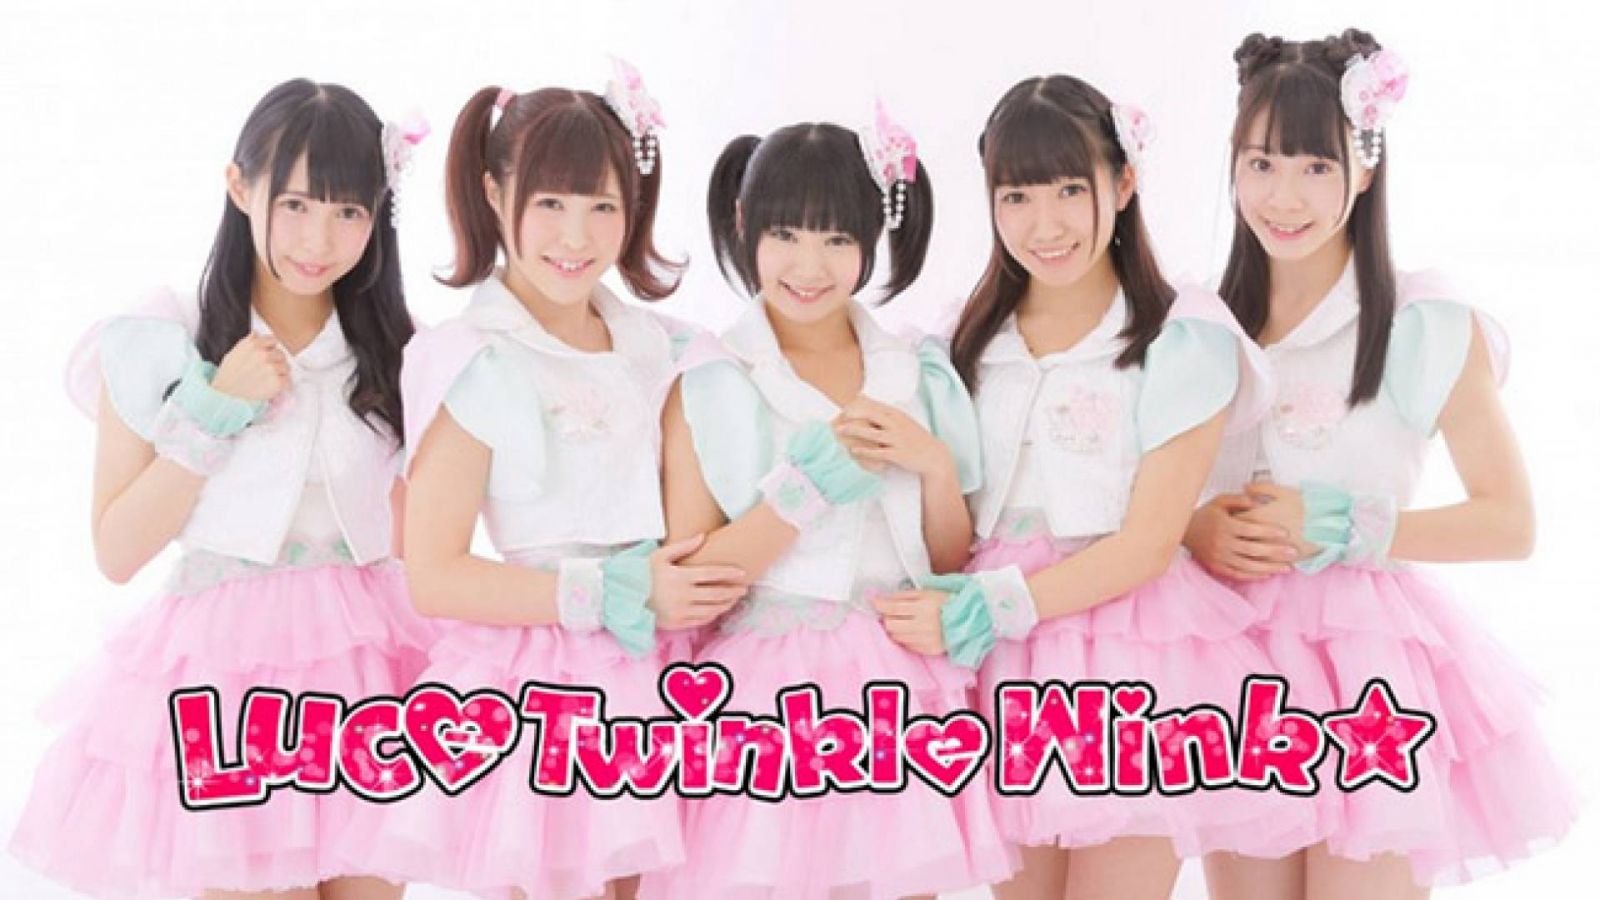 Luce Twinkle Wink☆ © Luce Twinkle Wink☆ - Arc Jewel - All rights reserved